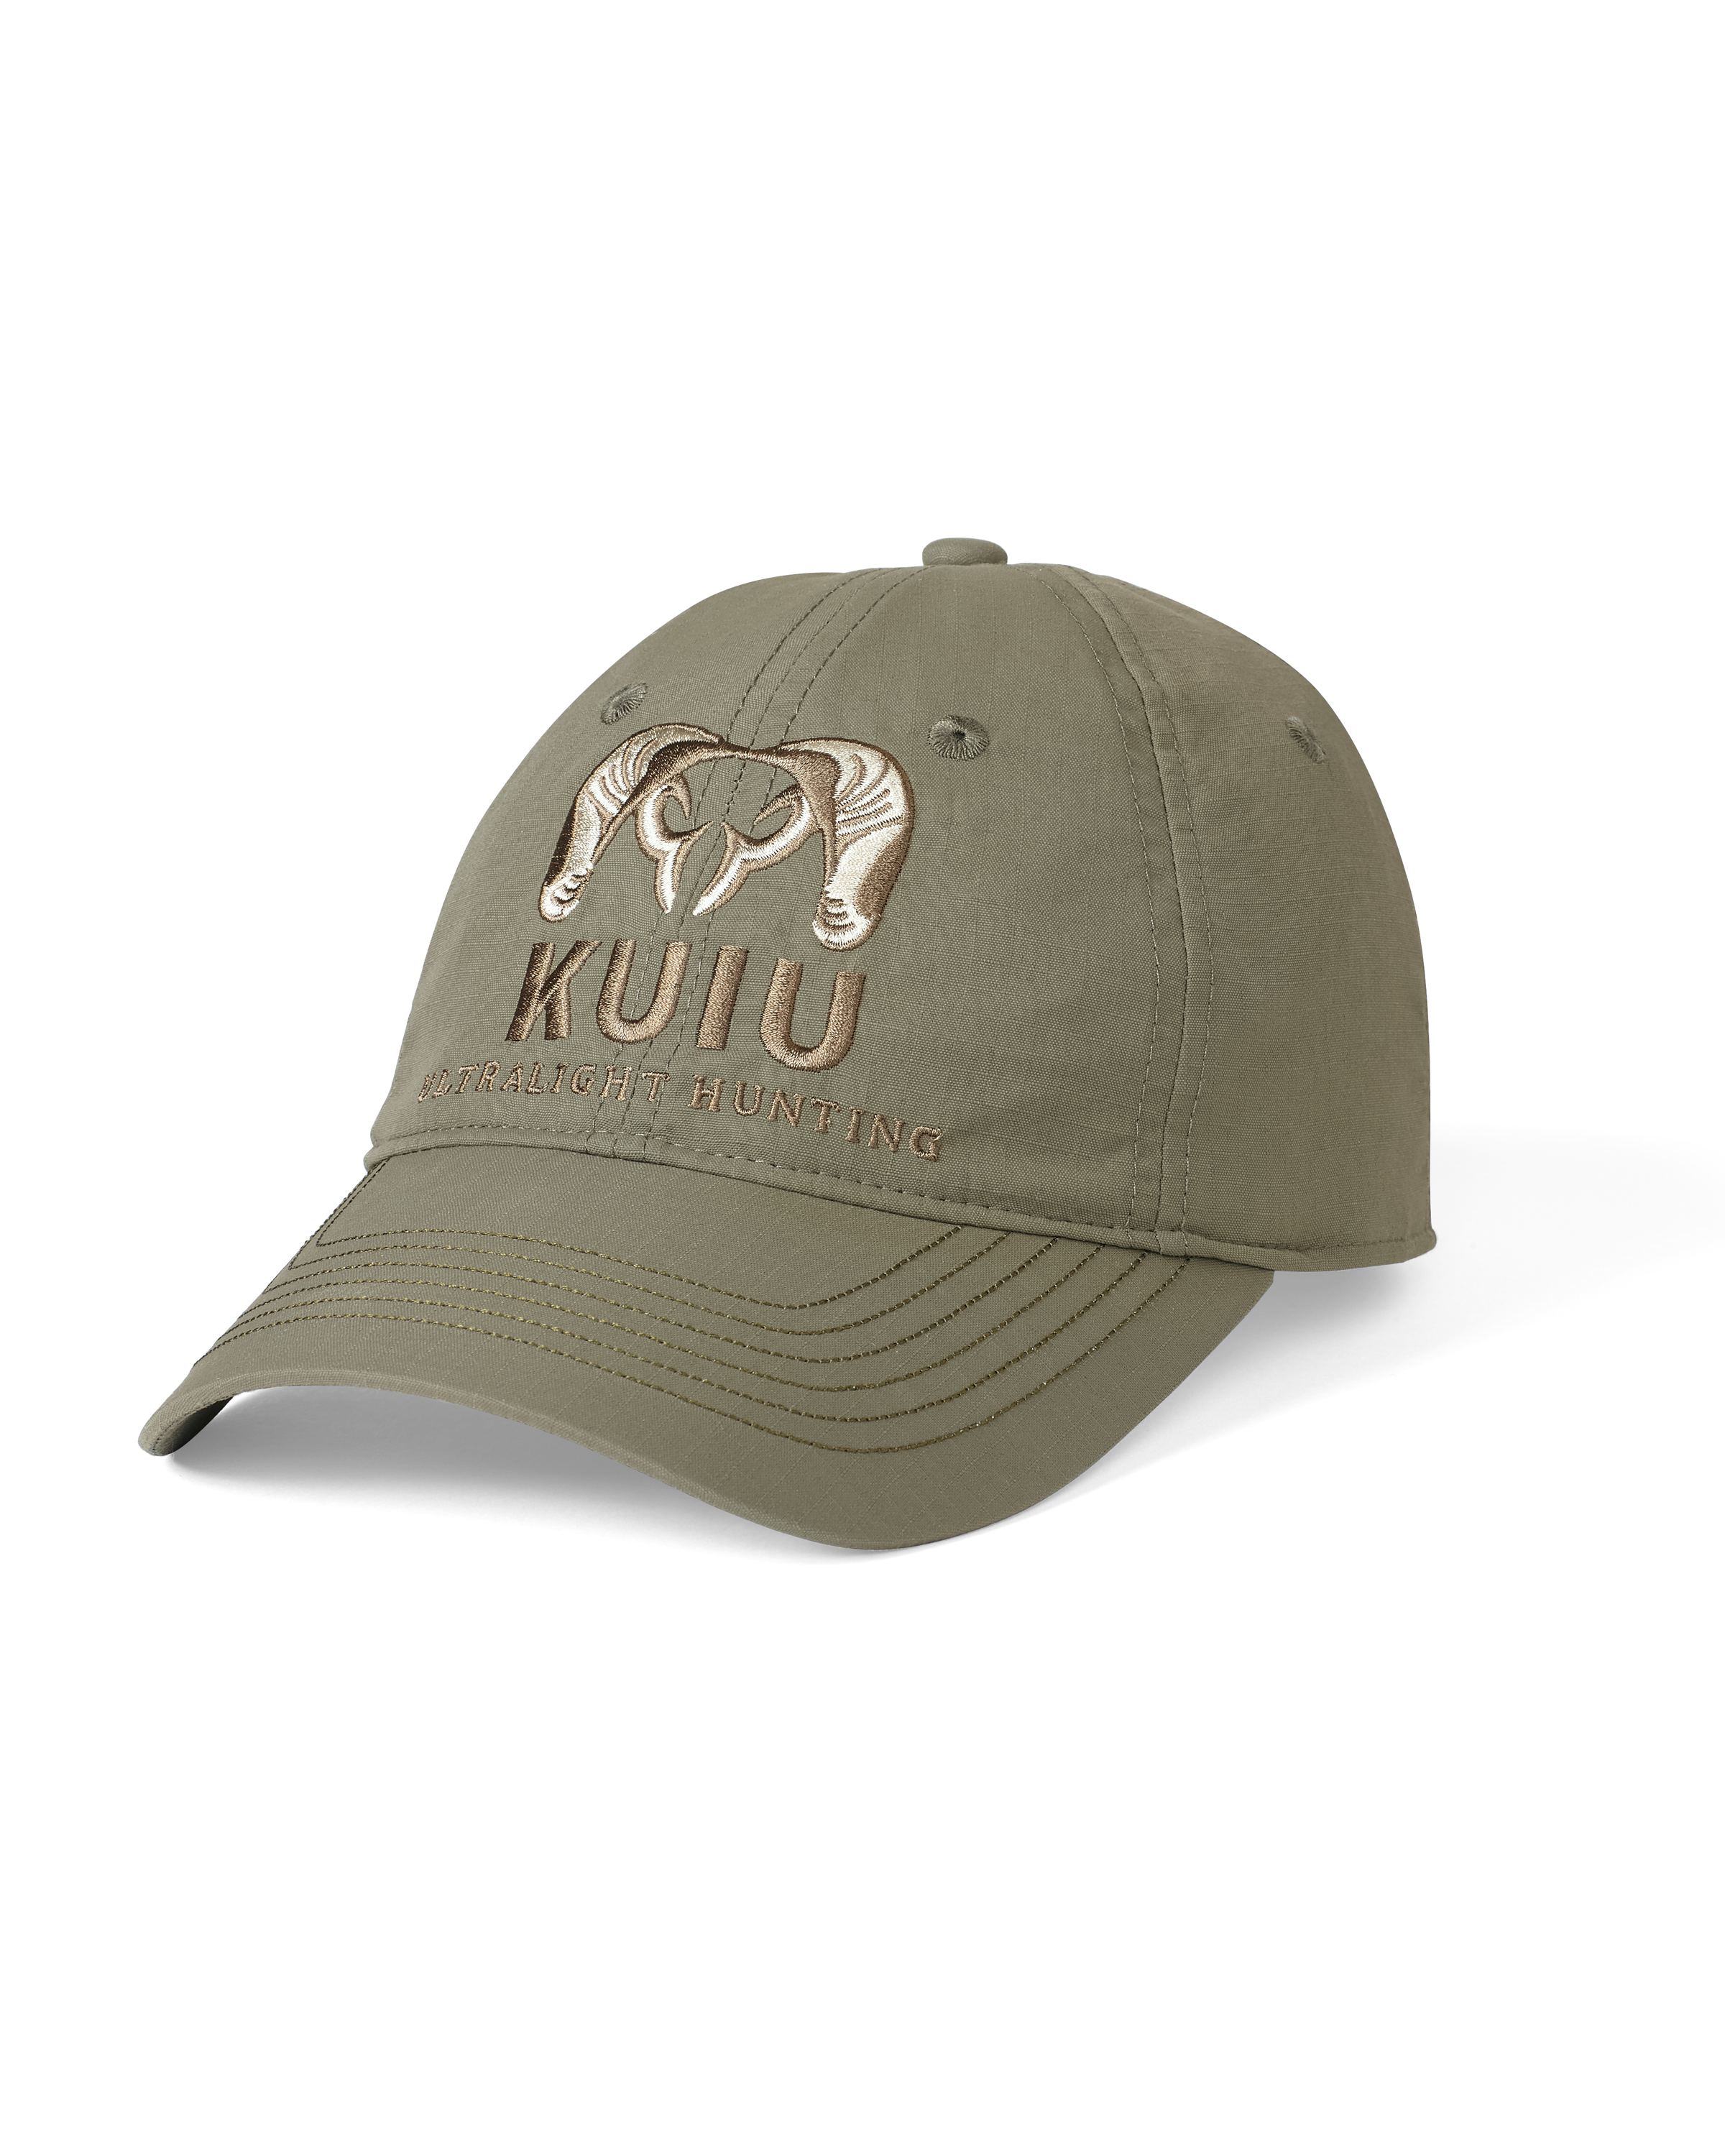 KUIU Outlet ICON Cap in Ash